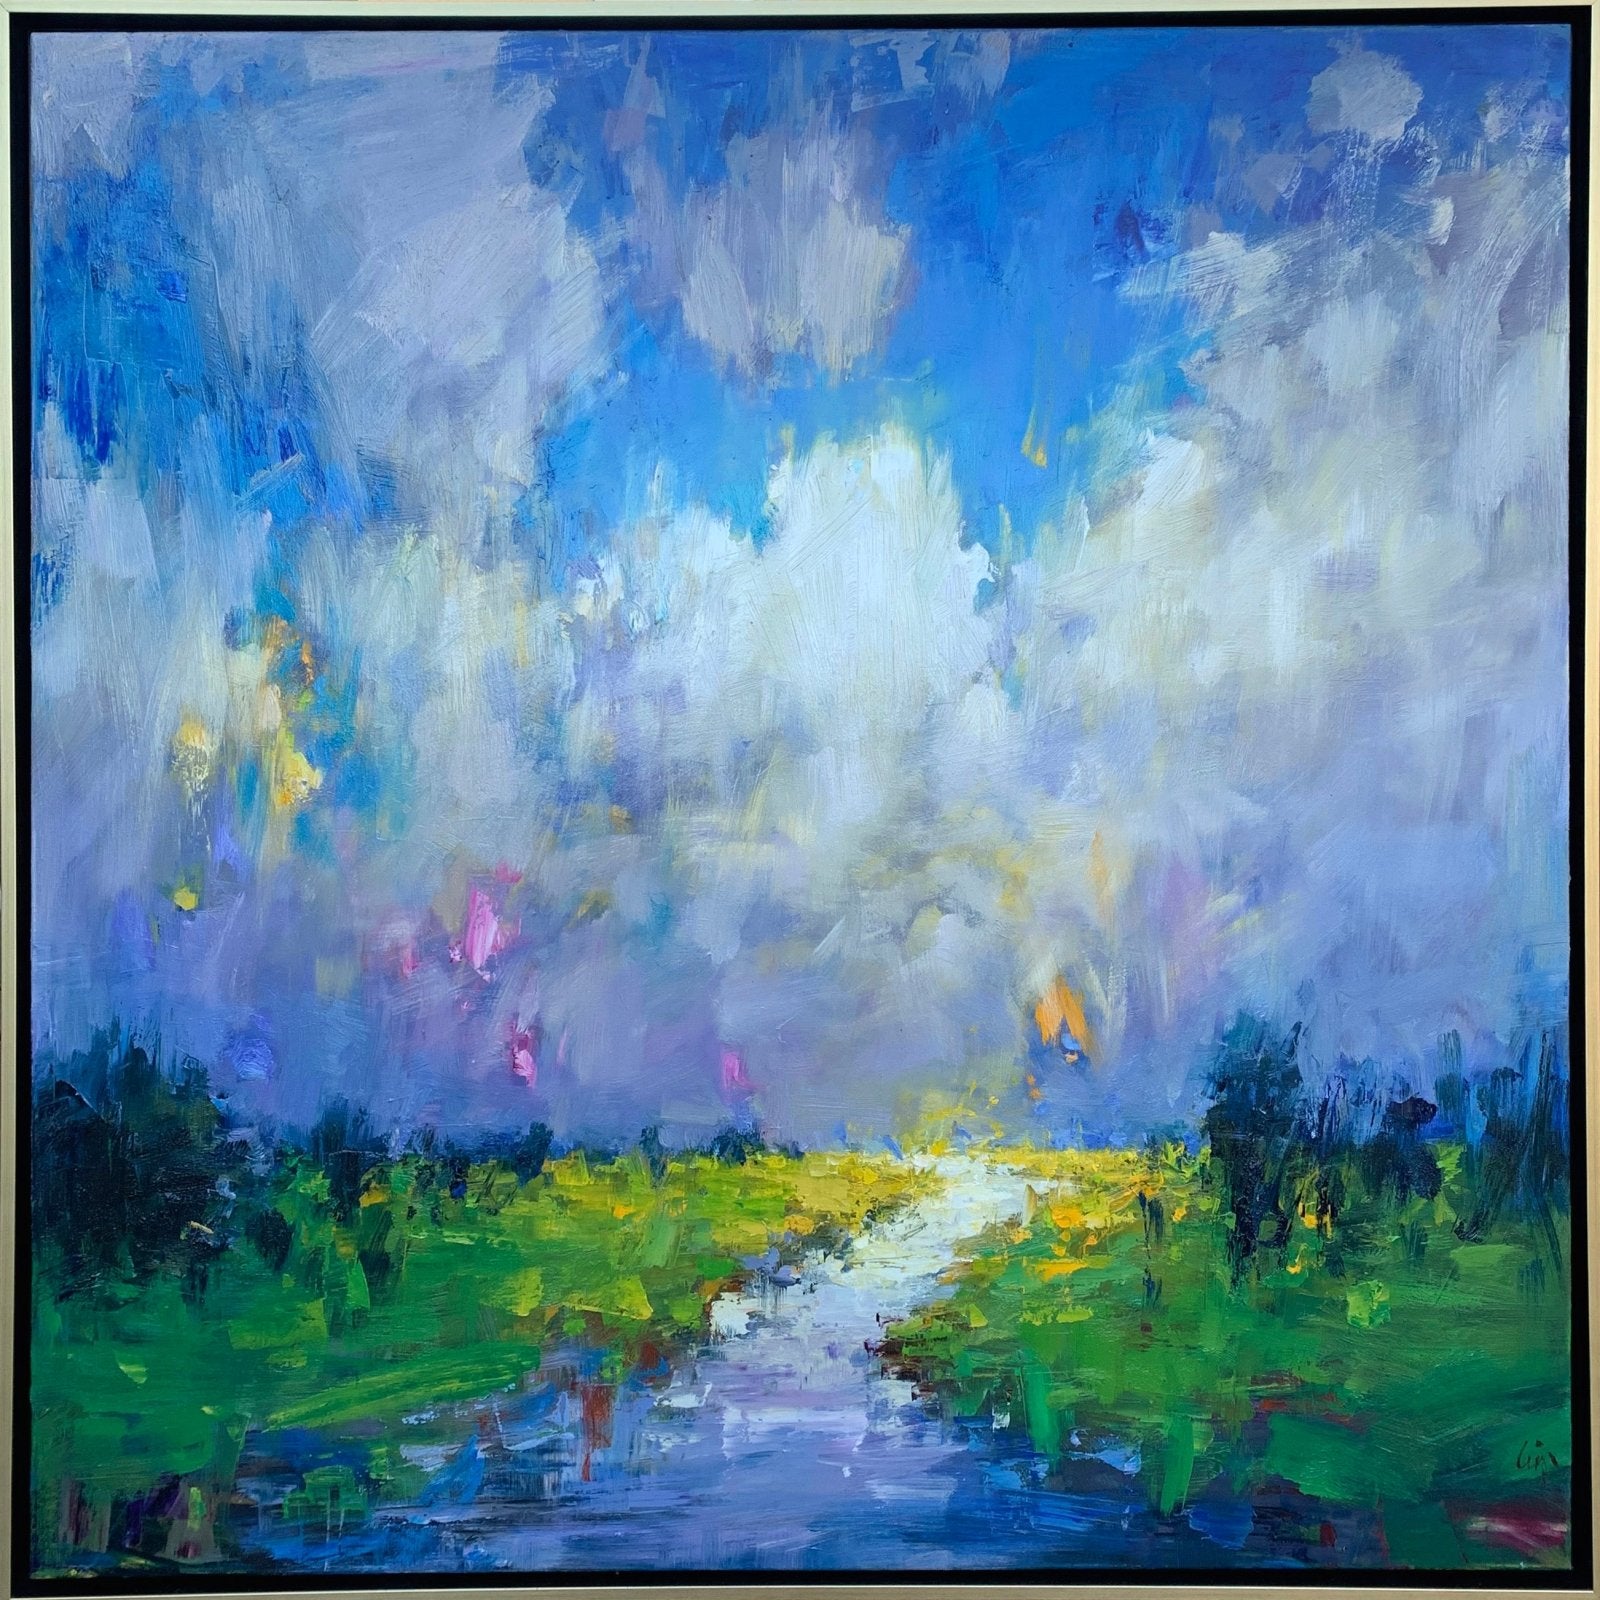 Clouds Over Wetland by Ning Lee at LePrince Galleries